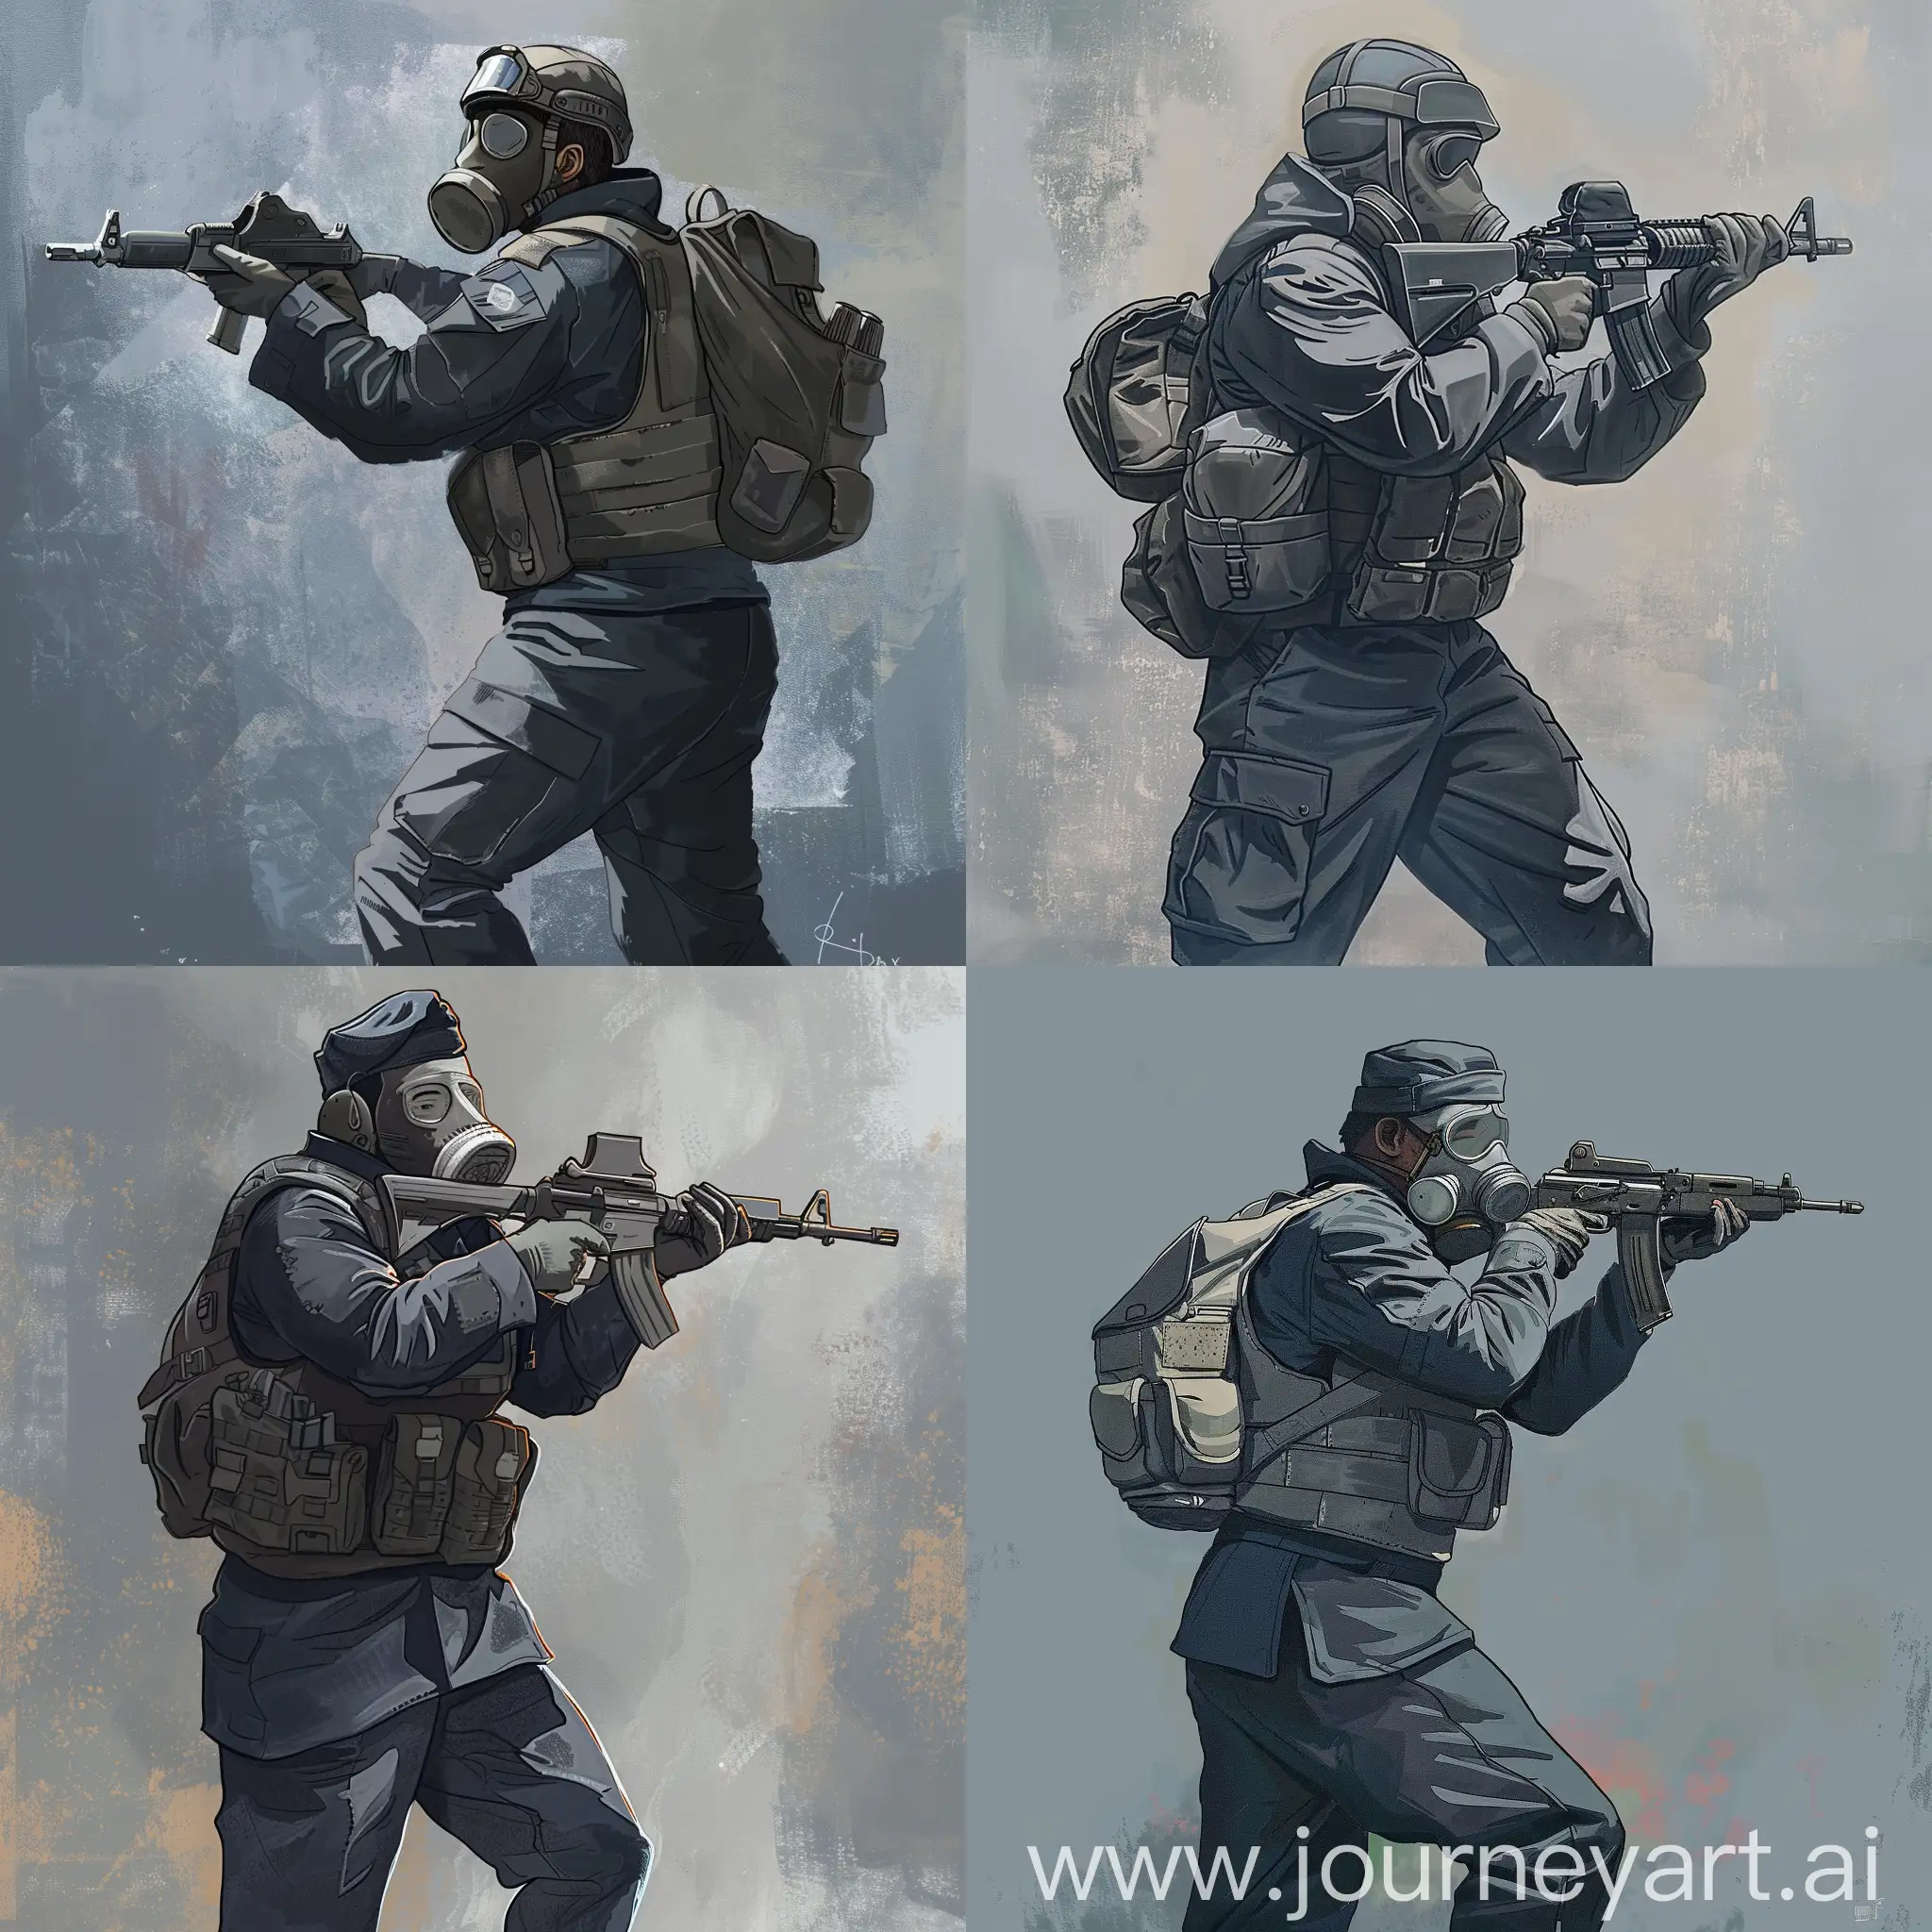 Concept art of a soldier, Dark blue uniform, military bulletproof vest, military unloading, a gasmask on his face, no hood, small military backpack on his back, and an MP-5 weapon in his hands.